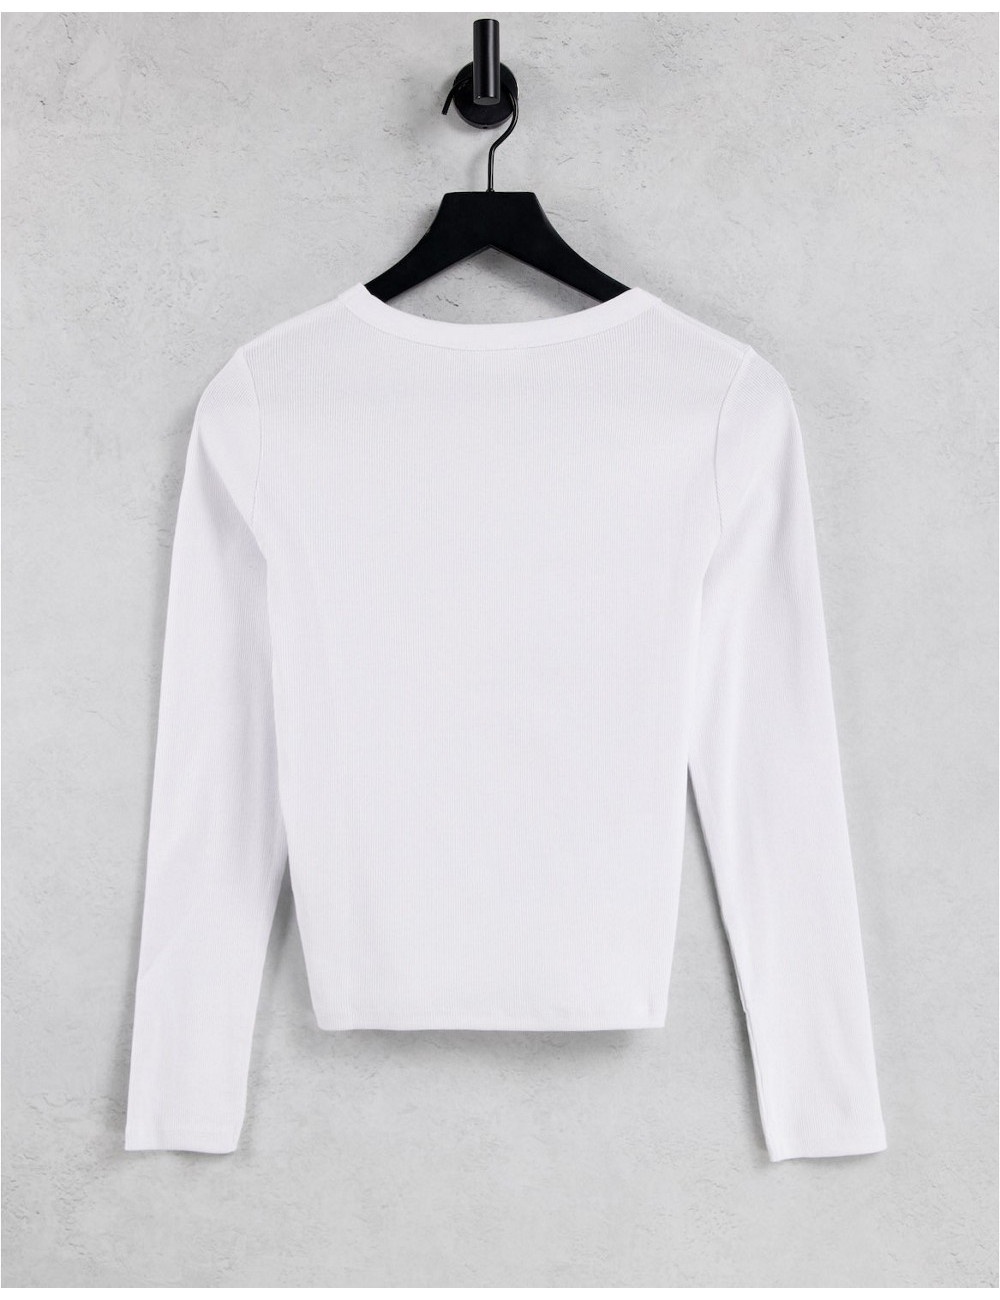 Cotton:On long sleeved top...